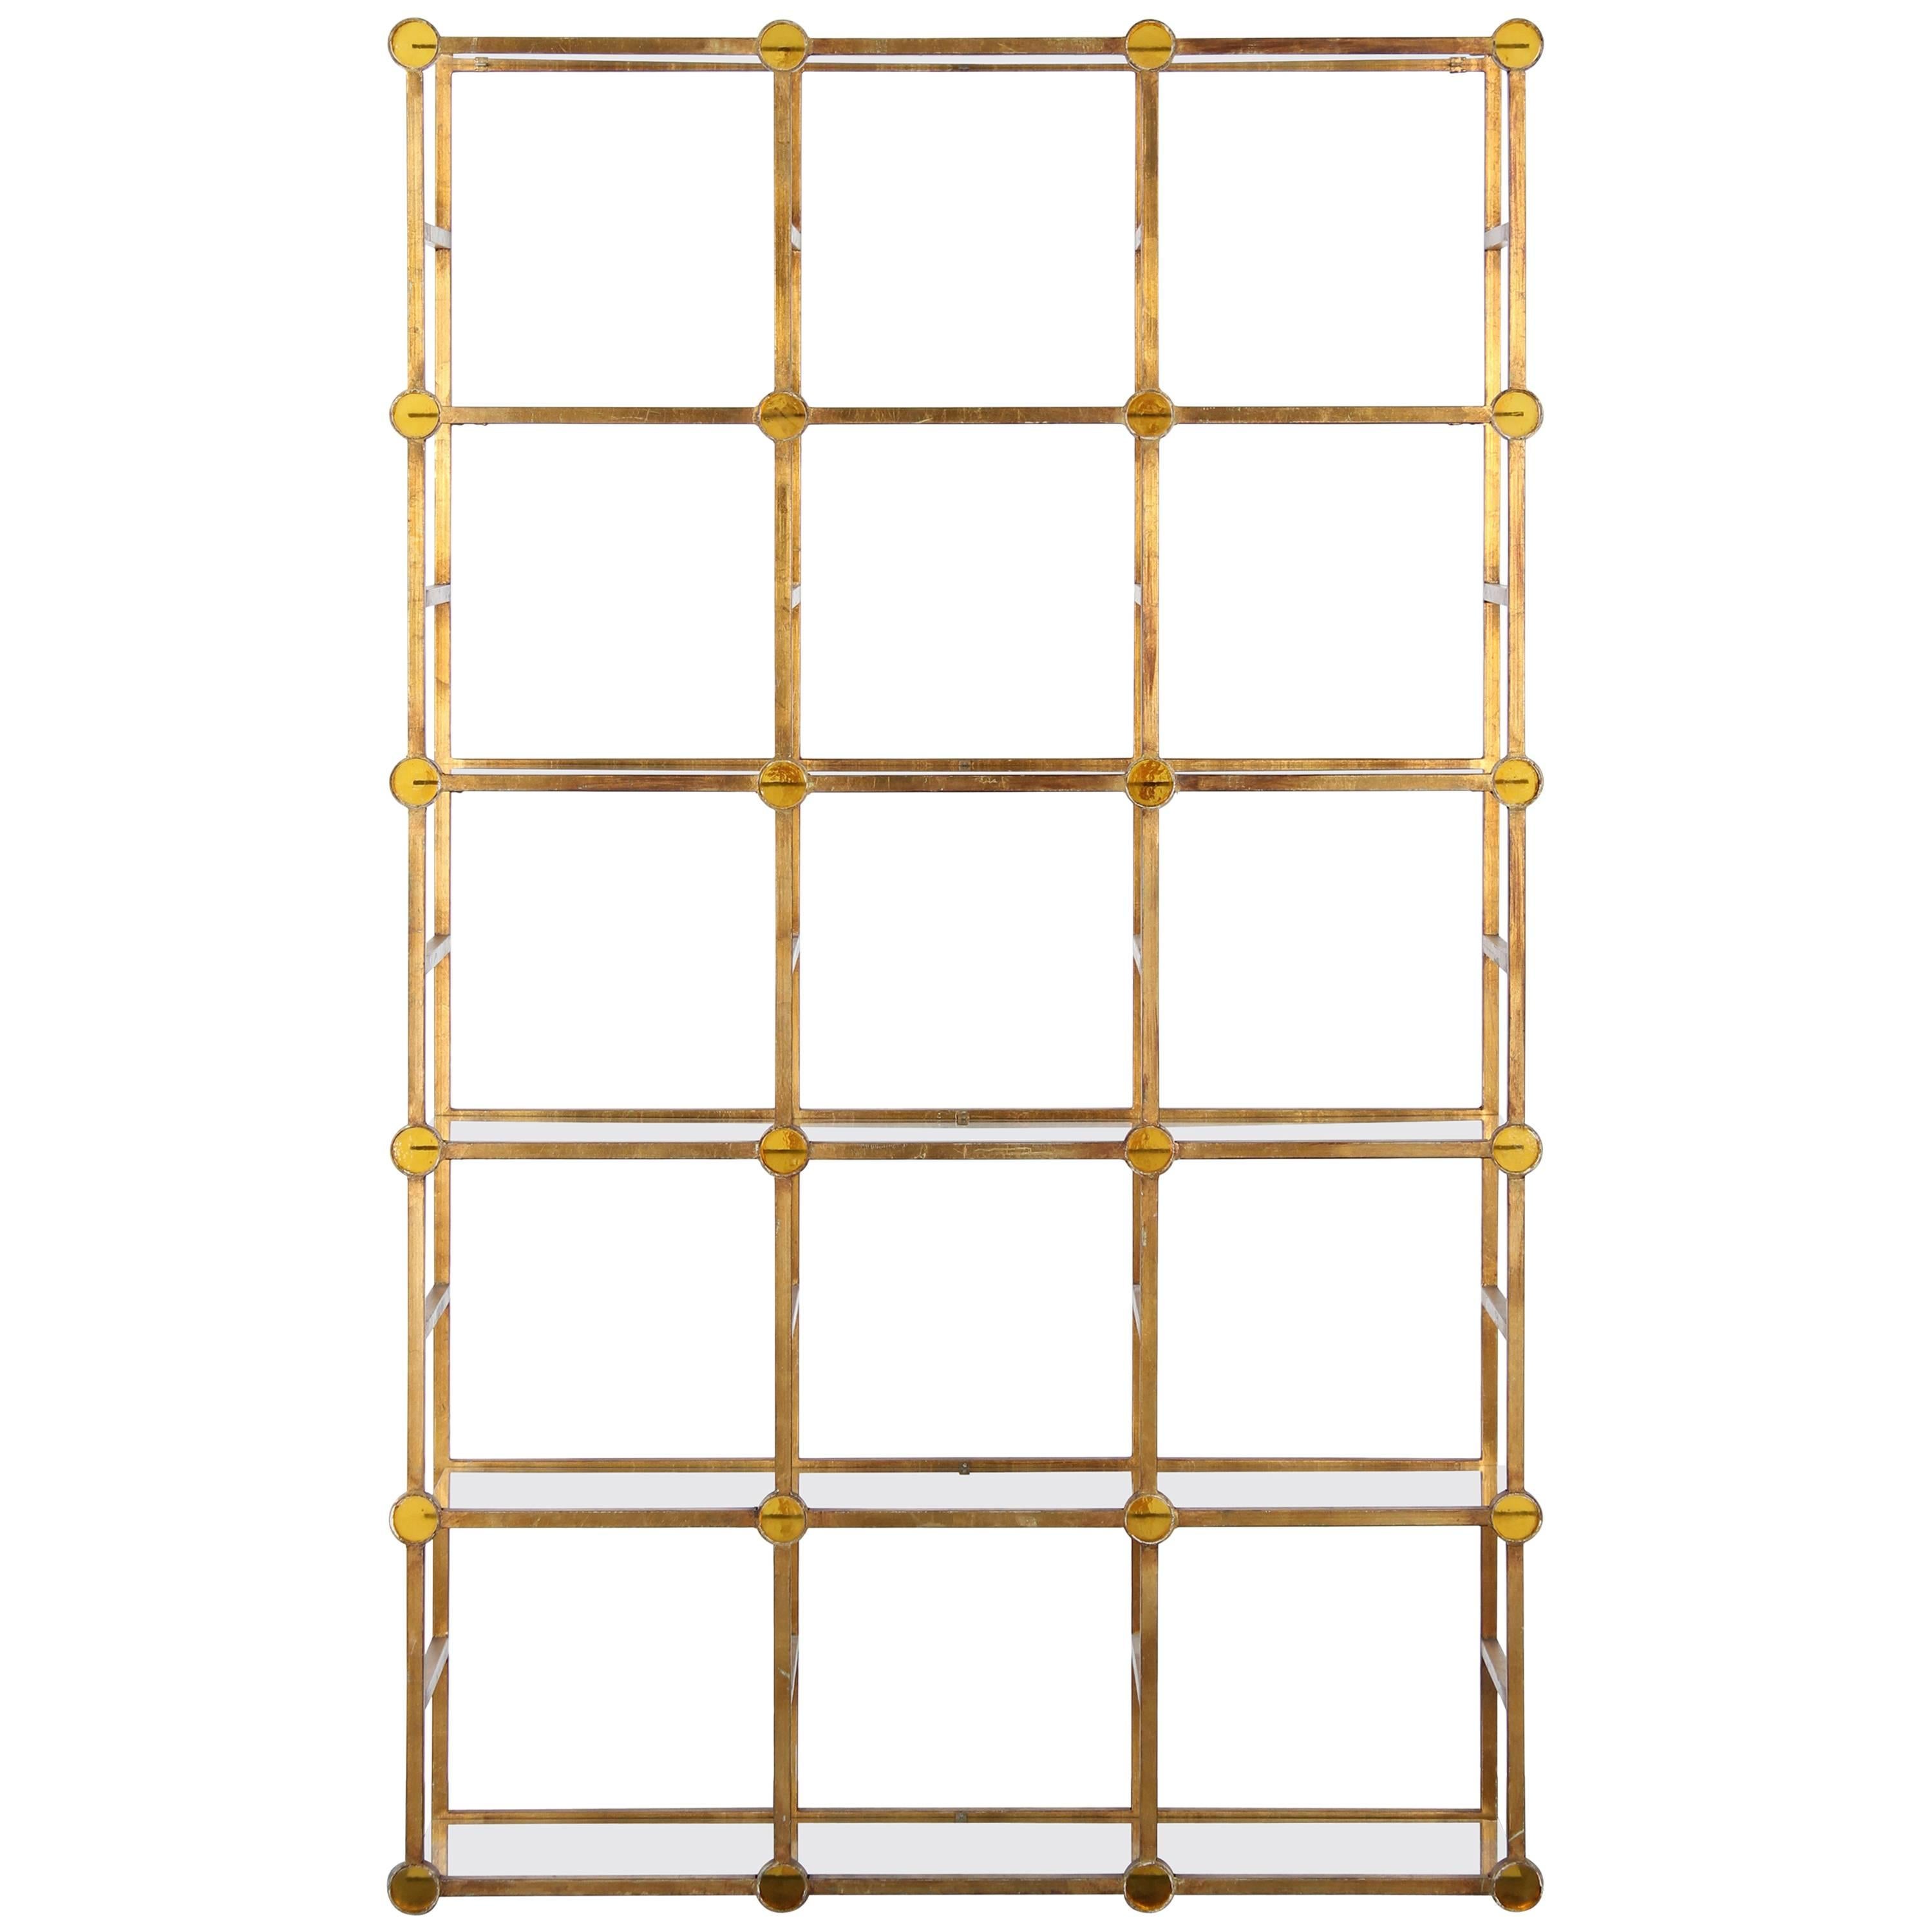 An amazing gilded iron étagère shelving unit. Its stunning architectural design features 24 yellow glass rondelles. Shelving unit is in good condition, some chips to glass shelves.